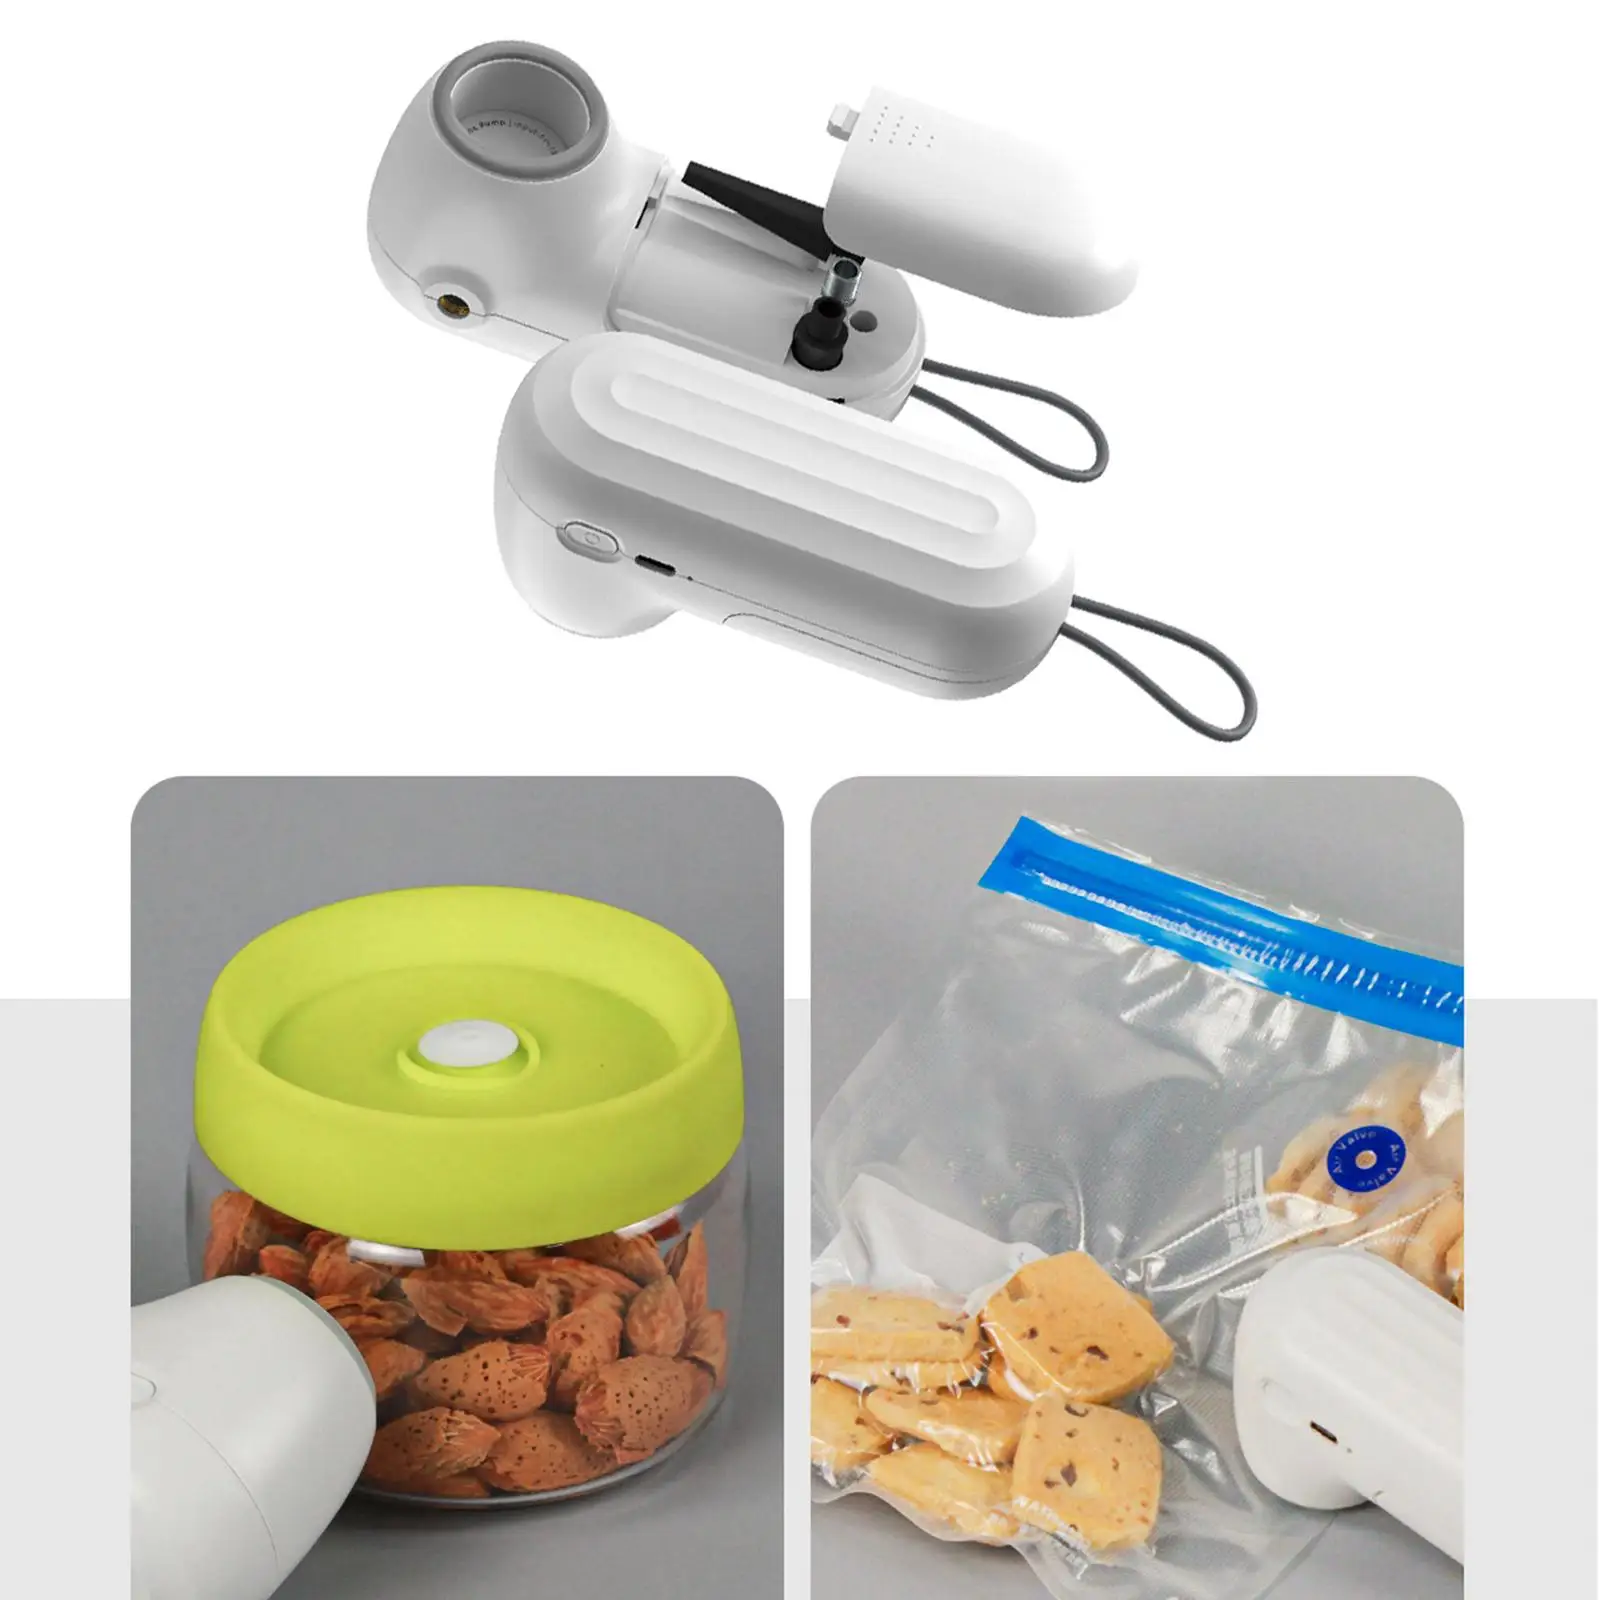 USB Food Vacuum Machine with Inflatable Valve Rechargeable Handheld Vacuum Pump for Valved Vacuum Bags Food Meat Vegetable Fresh